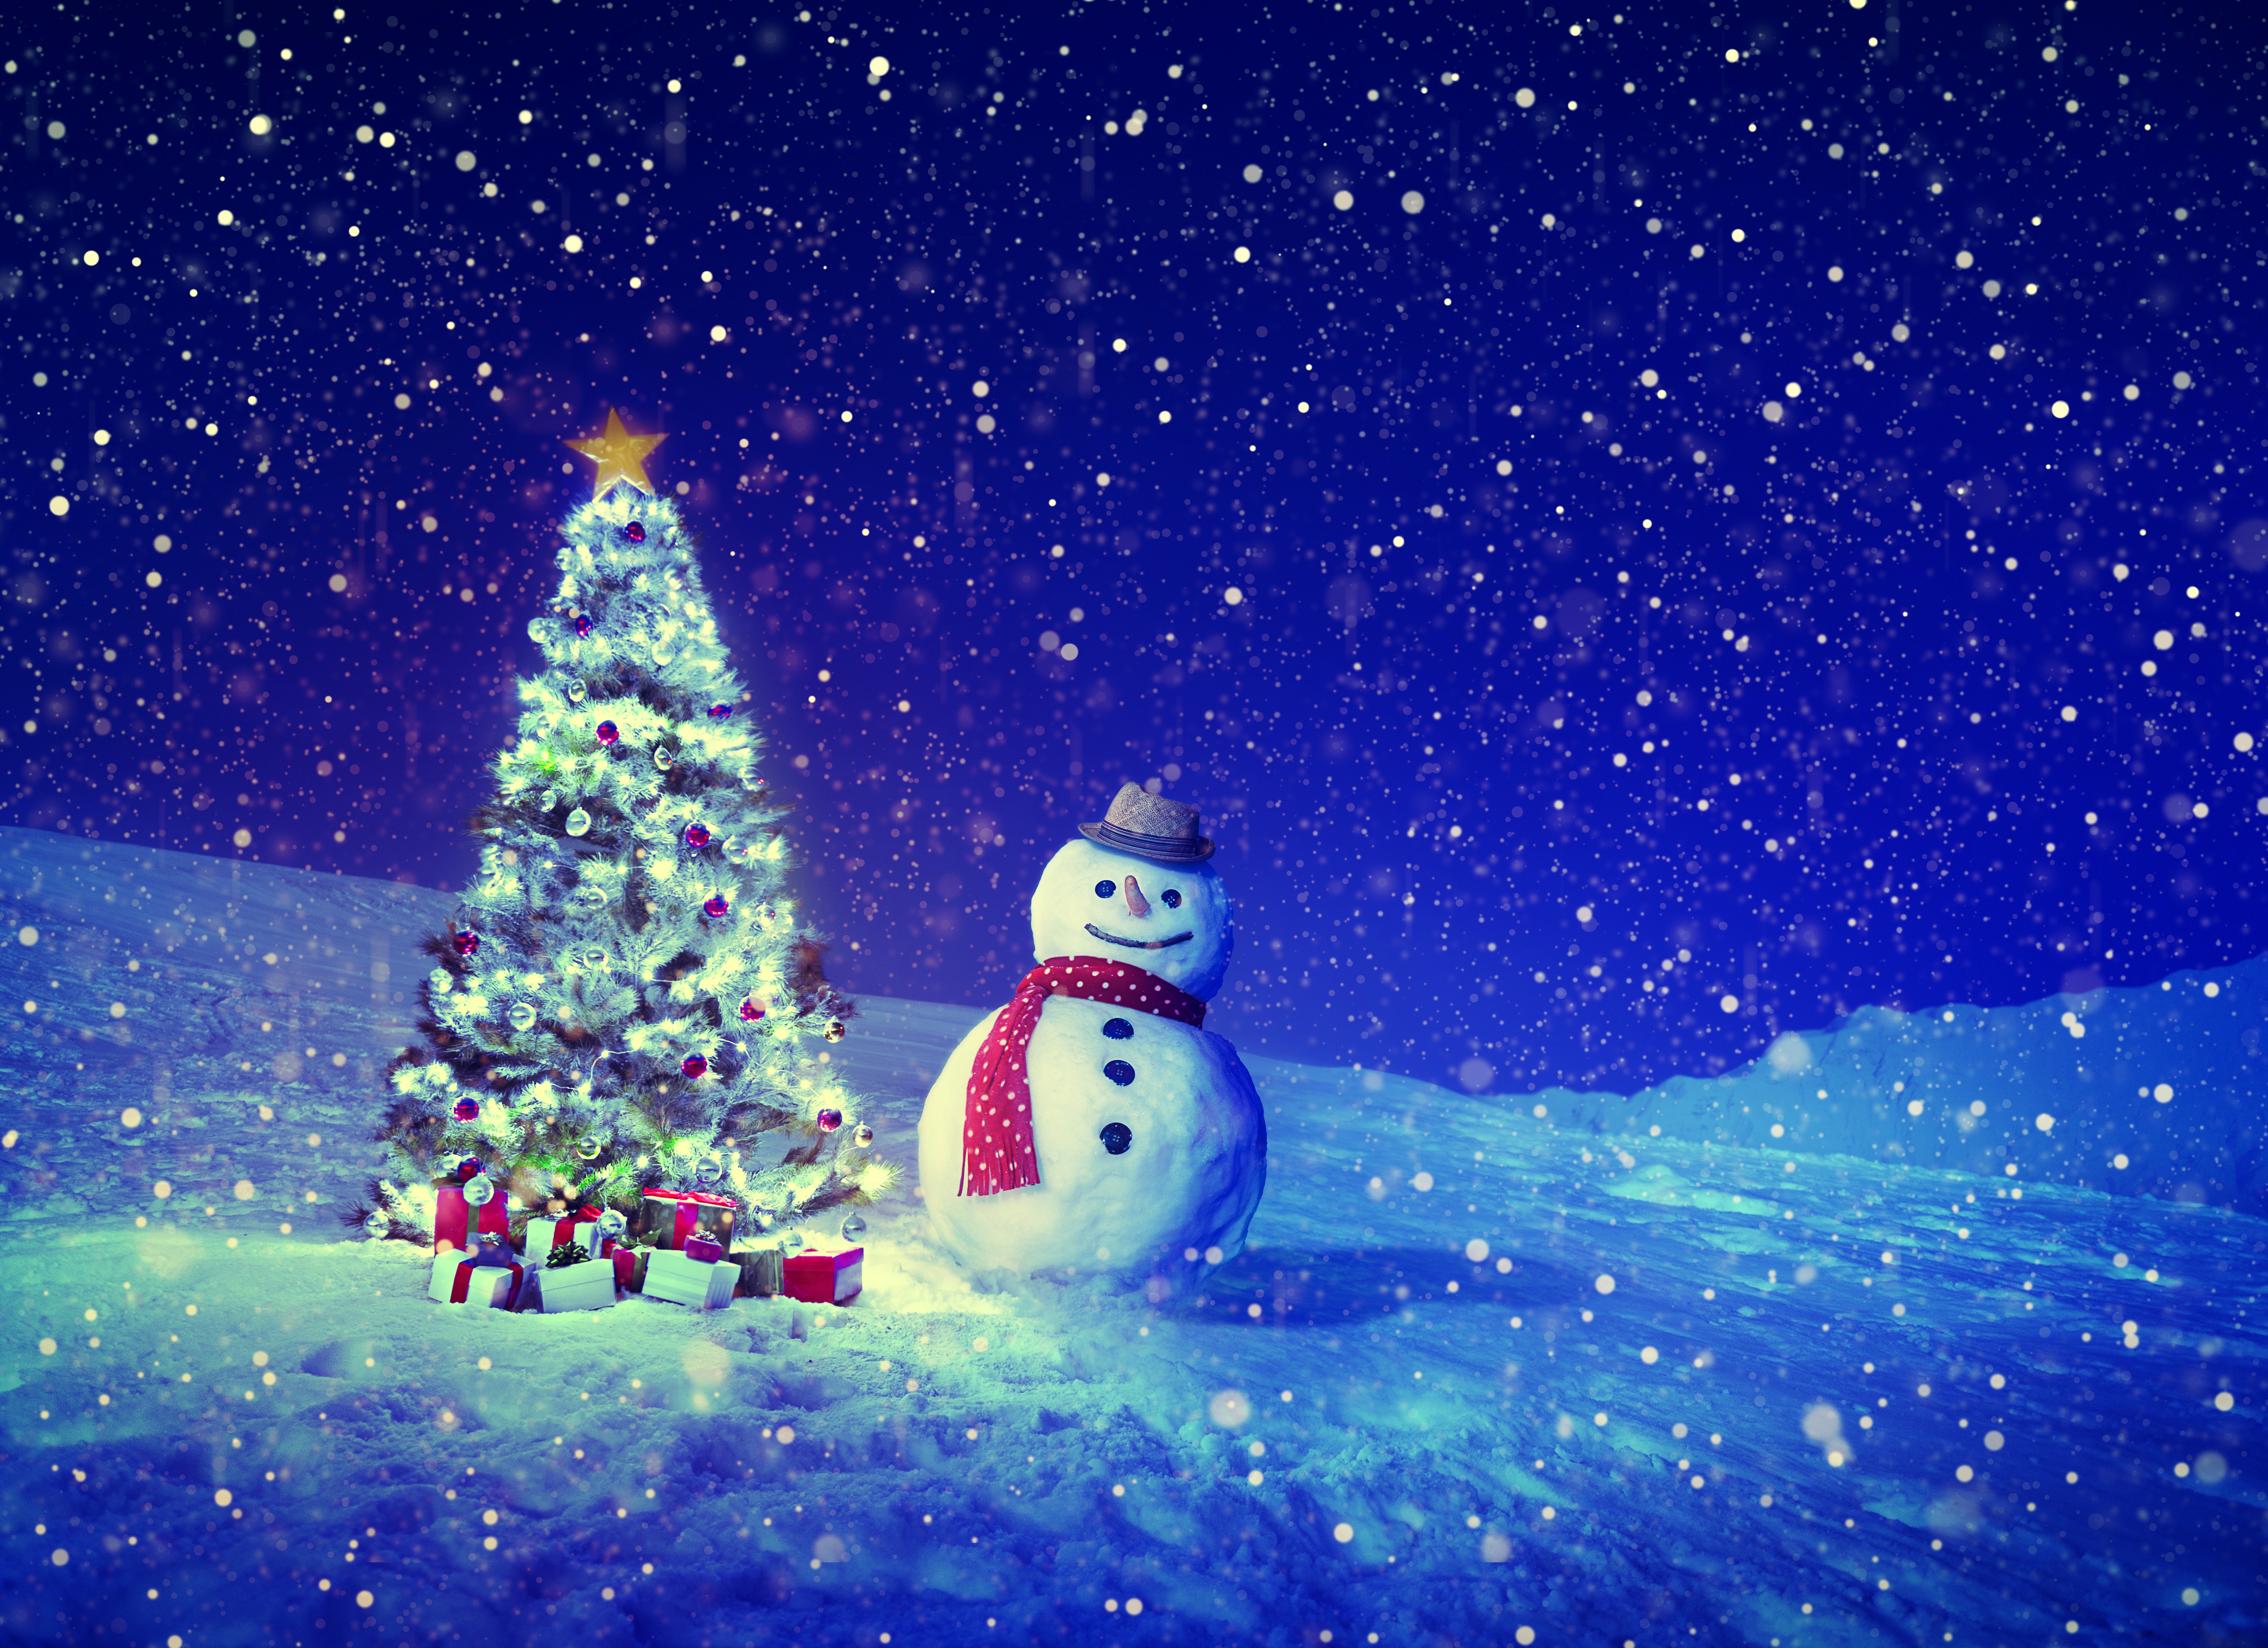 White Snowglobe Hanging on Christmas TreeChristmas Wallpaper Aesthetic   Idea Wallpapers  iPhone WallpapersColor Schemes